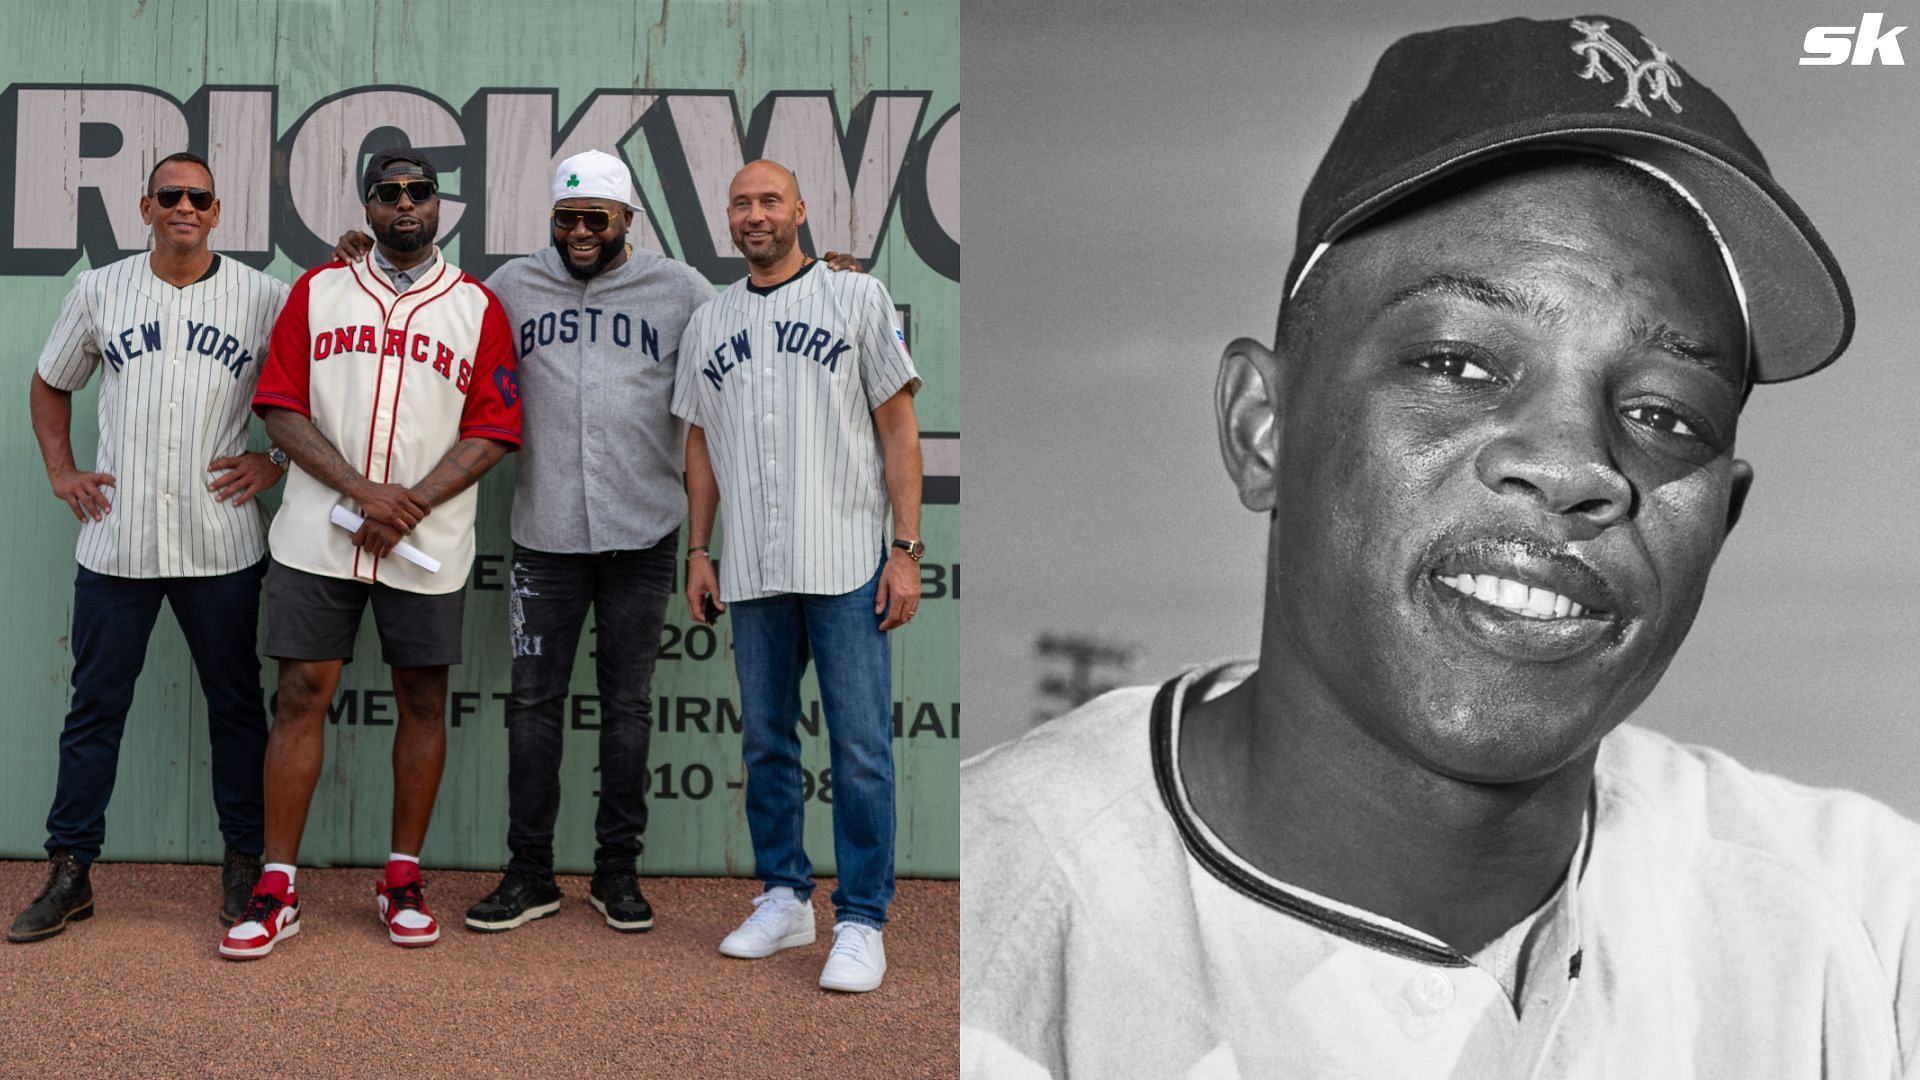 MLB Royalty Jeter, A-Rod, Ortiz sport team jerseys to pay homage to Willie Mays (Source: MLB.com and X)